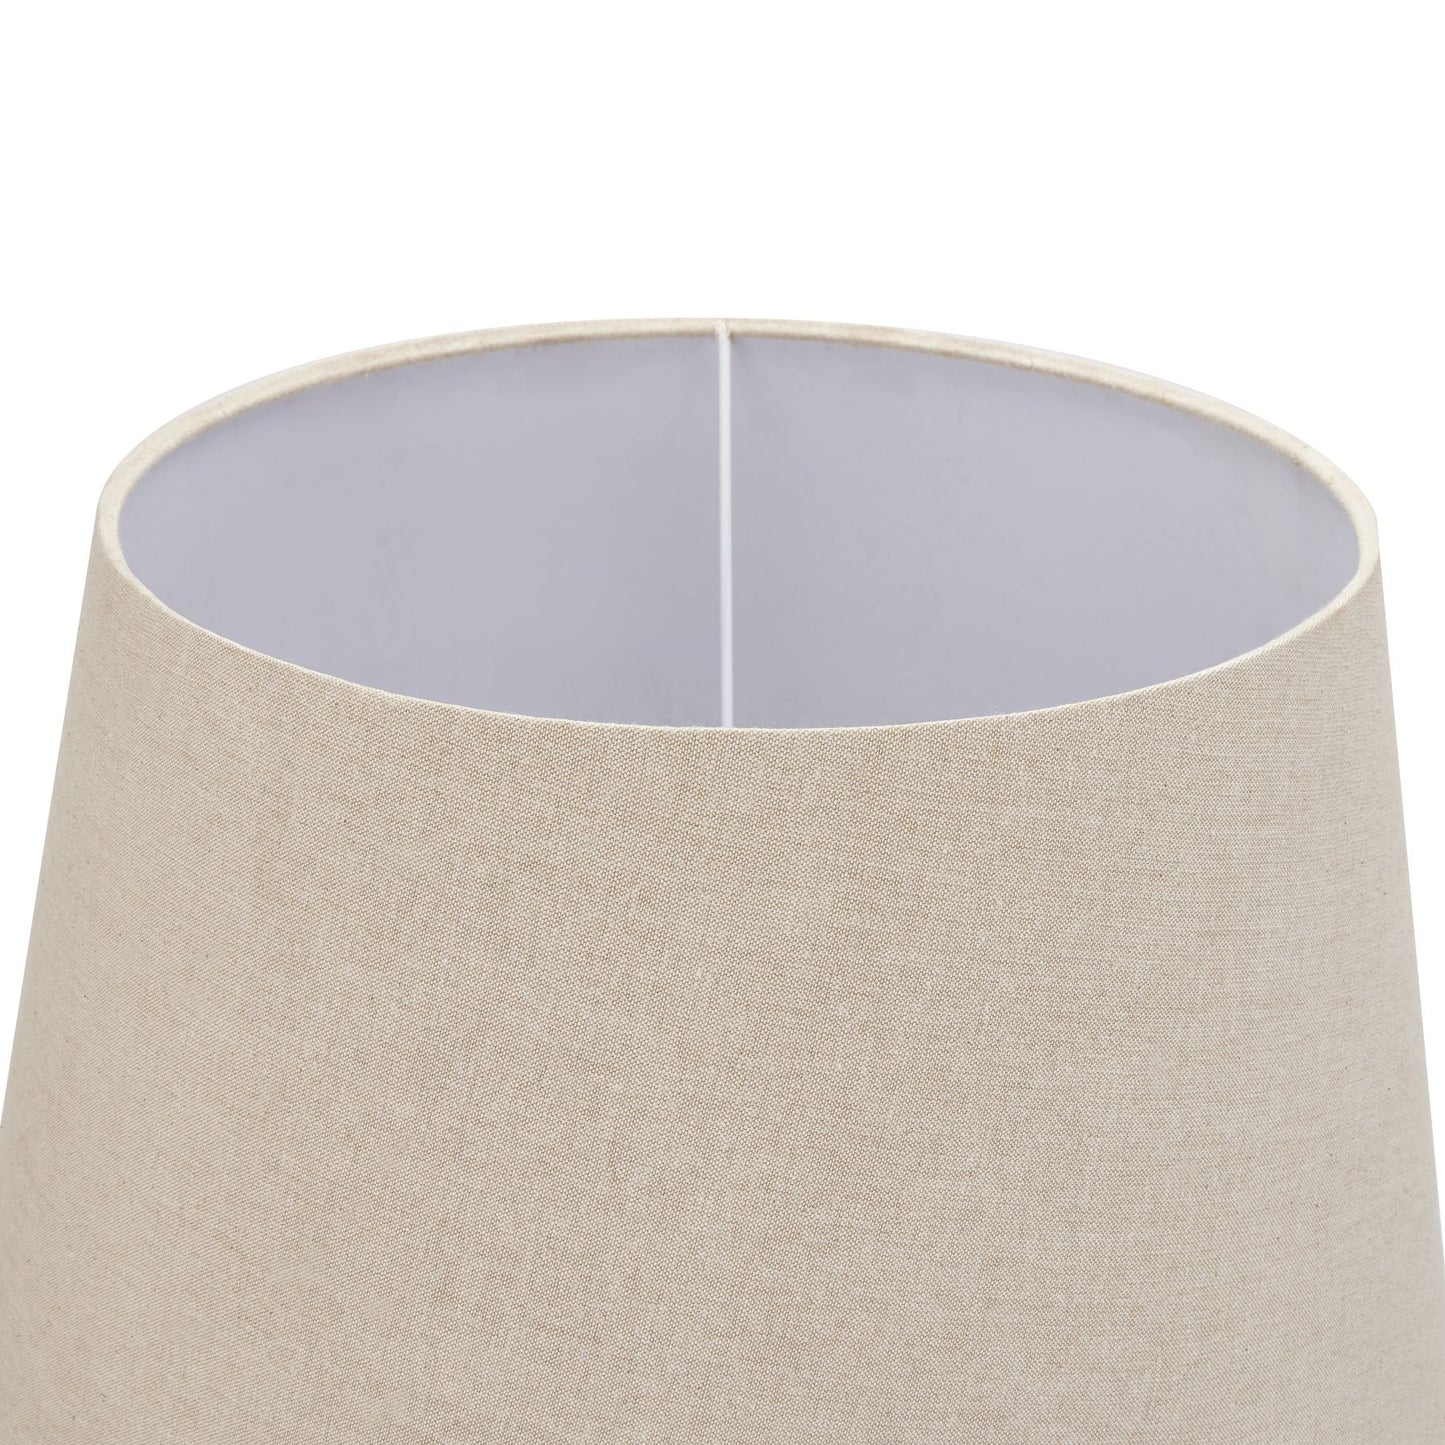 Delaney Collection Grey Urn Lamp With Linen Shade